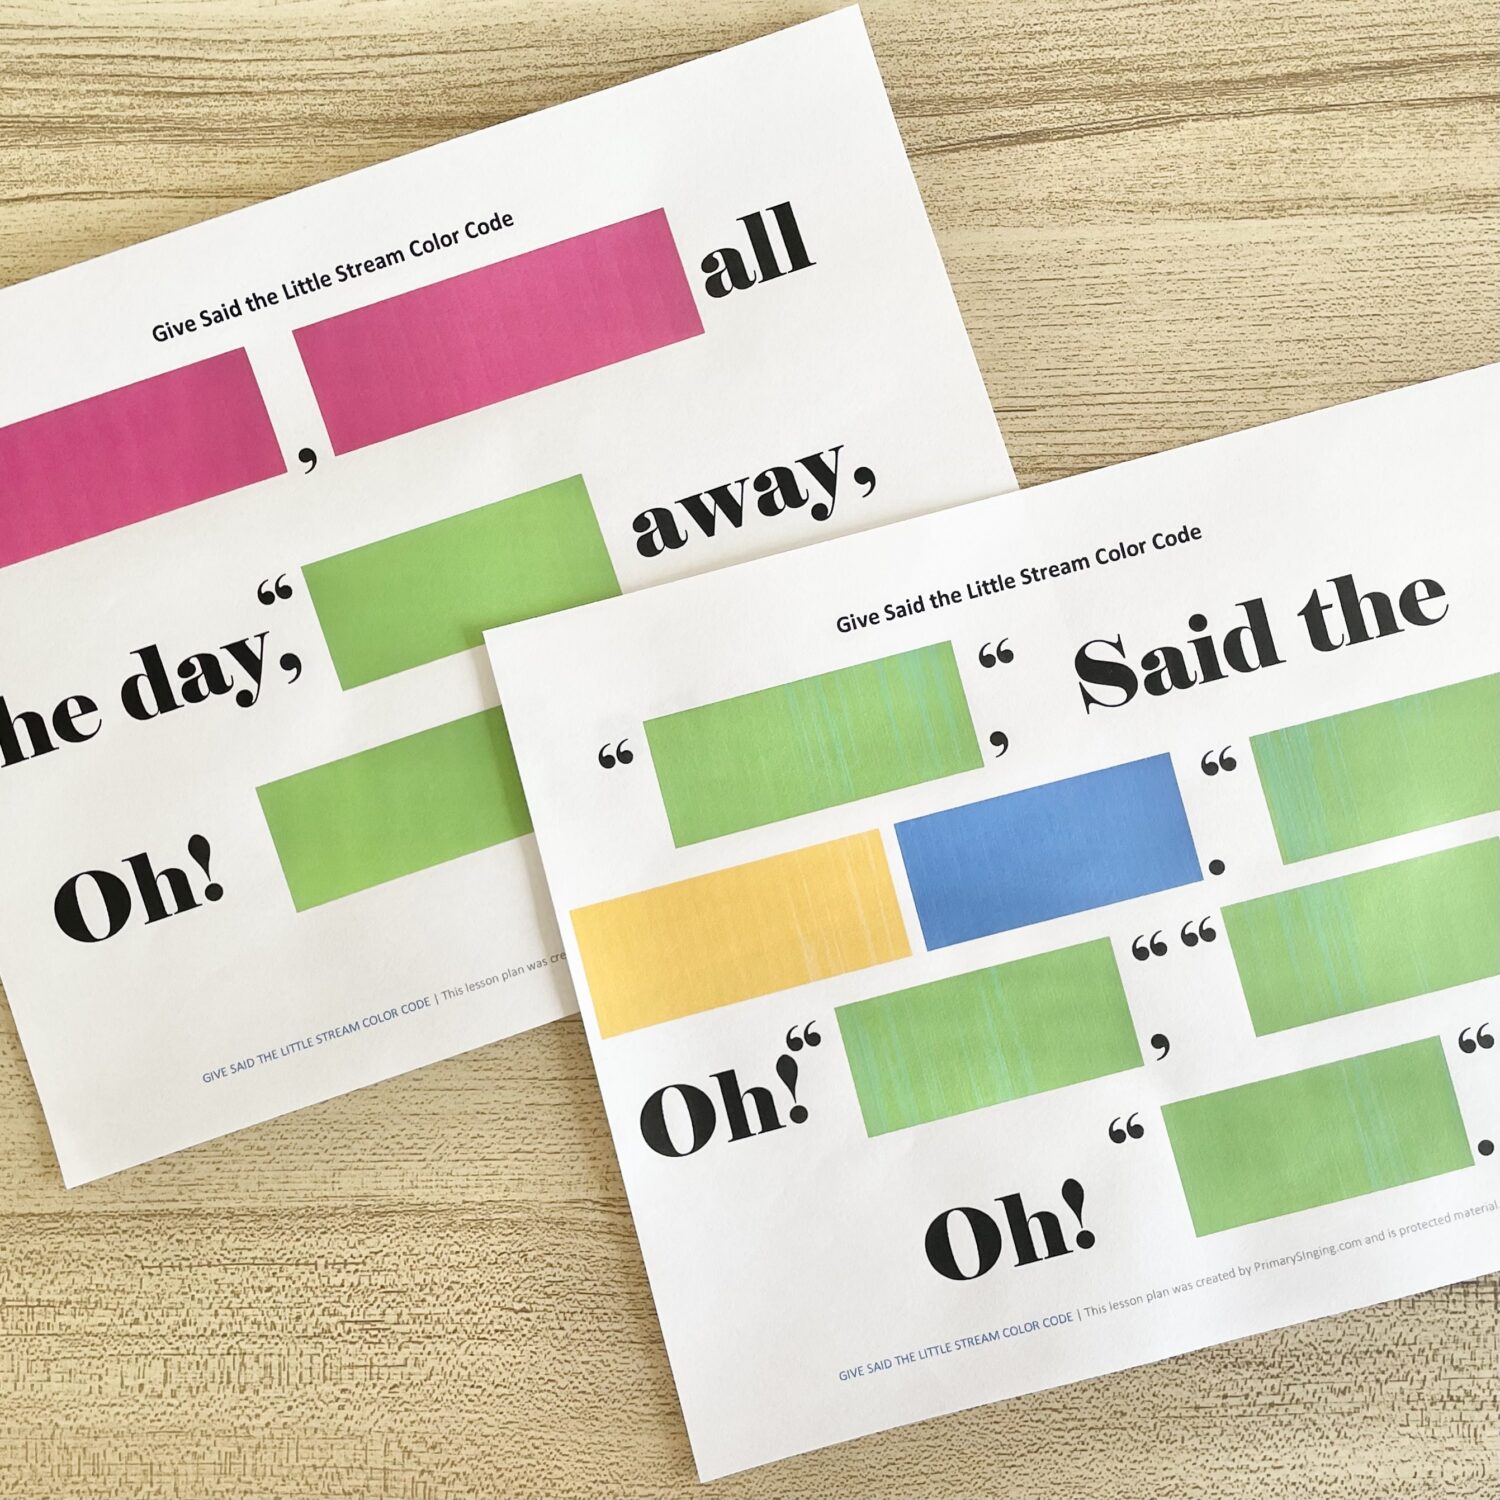 Give Said the Little Stream Color Code singing time idea! Use this fun logical conclusions activity with a printable color code and song helps for LDS Primary Music Leaders.